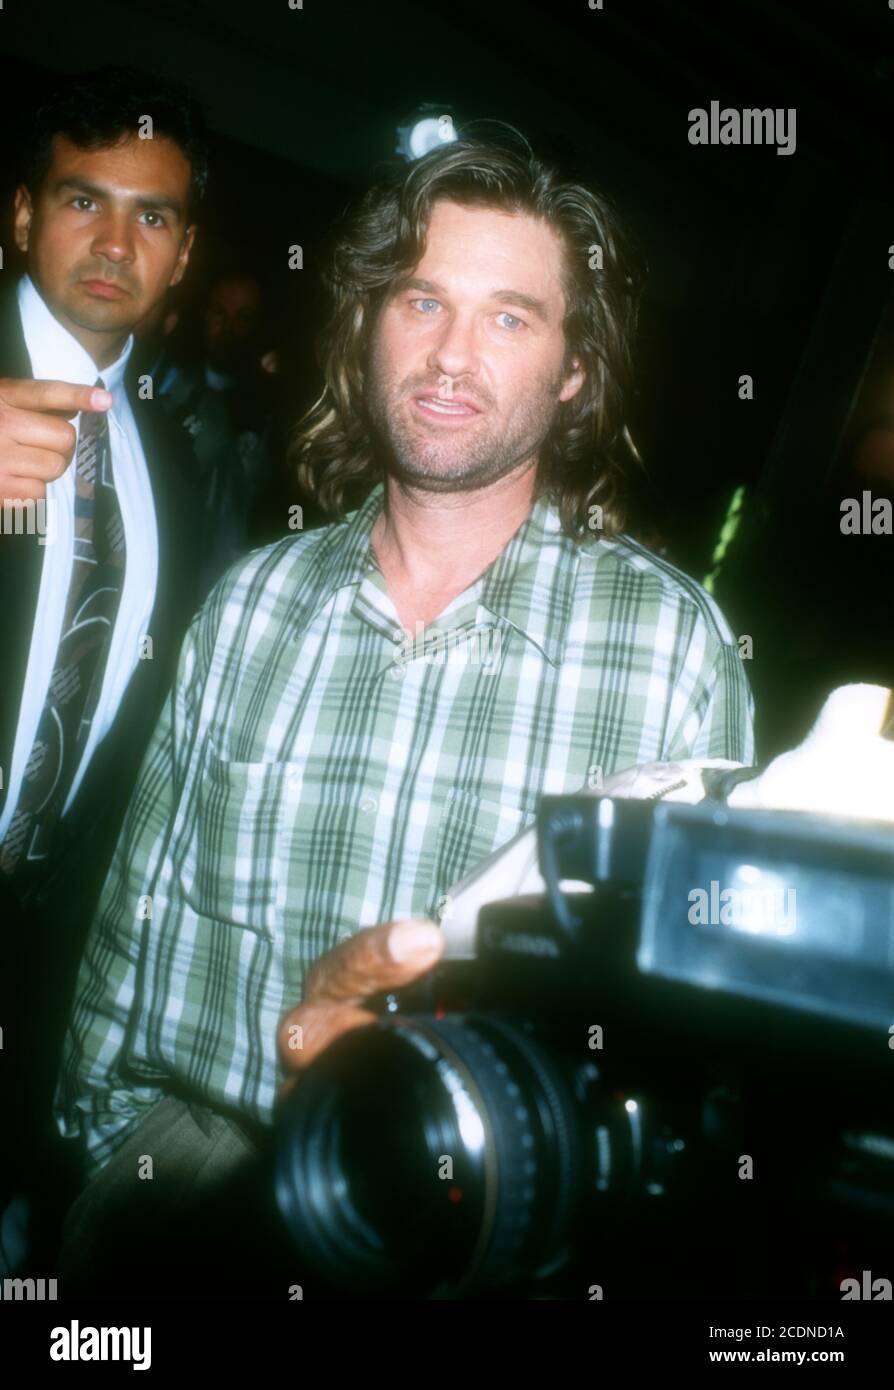 Westwood, California, USA 11th March 1996 Actor Kurt Russell attends Warner Bros. Pictures' 'Executive Decision' Premiere on March 11, 1996 at Mann Village Theatre in Westwood, California, USA. Photo by Barry King/Alamy Stock Photo Stock Photo